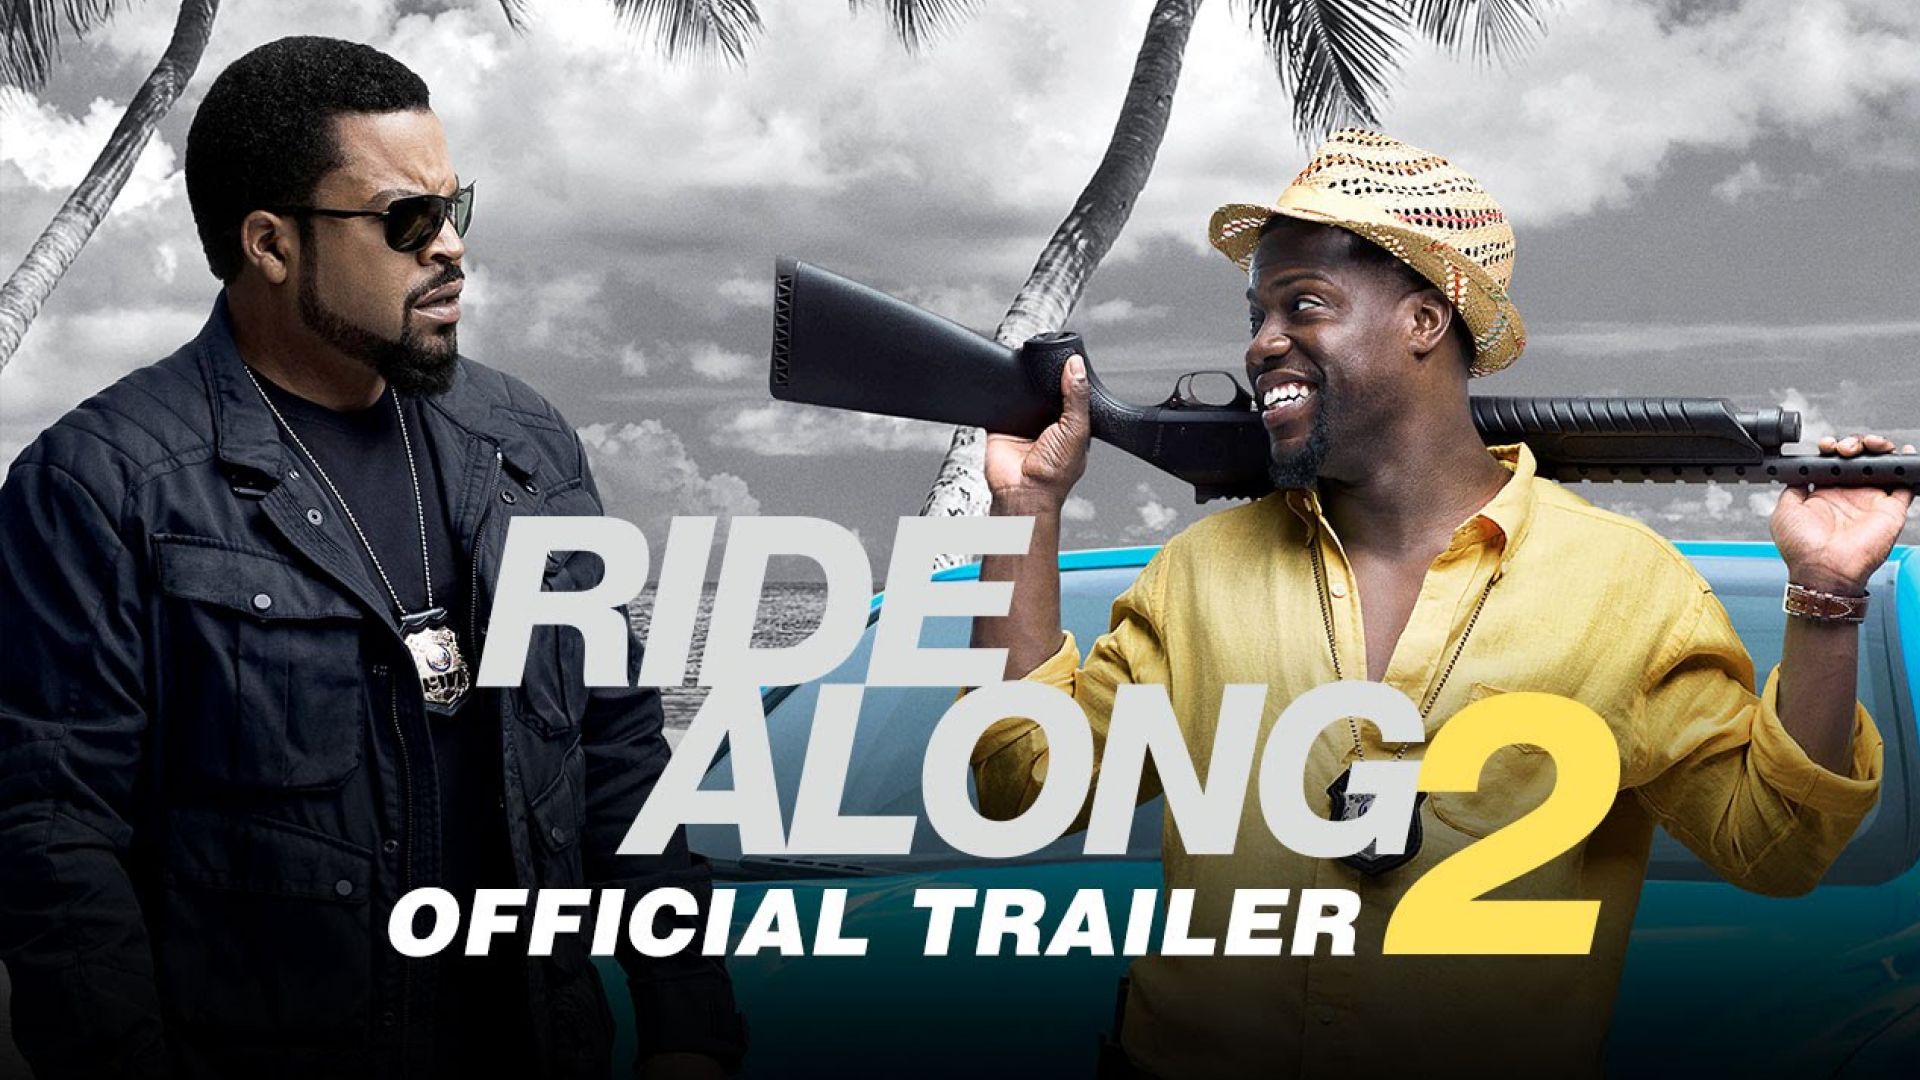 Kevin Hart and Ice Cube Return in First Trailer for 'Ride Al